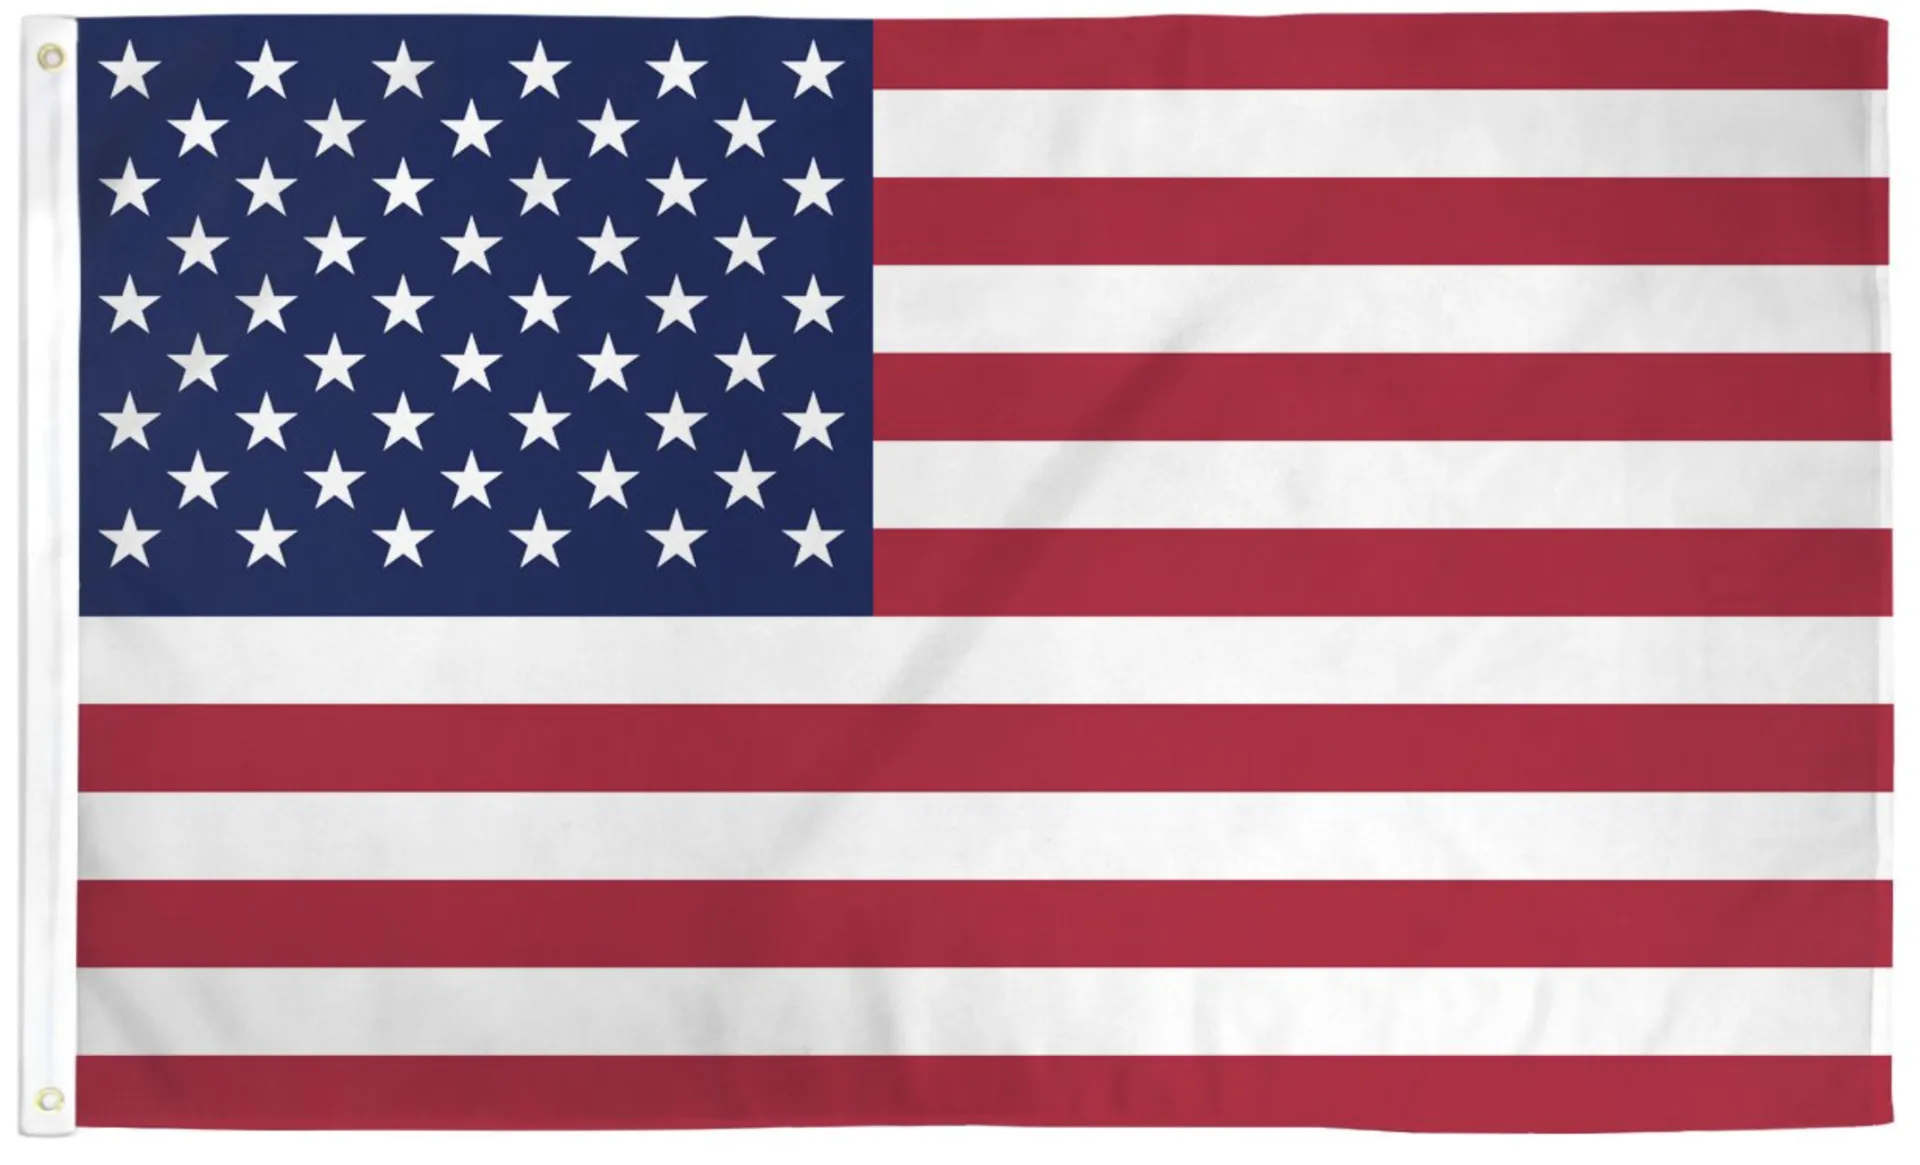 US Flag - Stars and Stripes - 3x5ft Full Size - Free Shipping